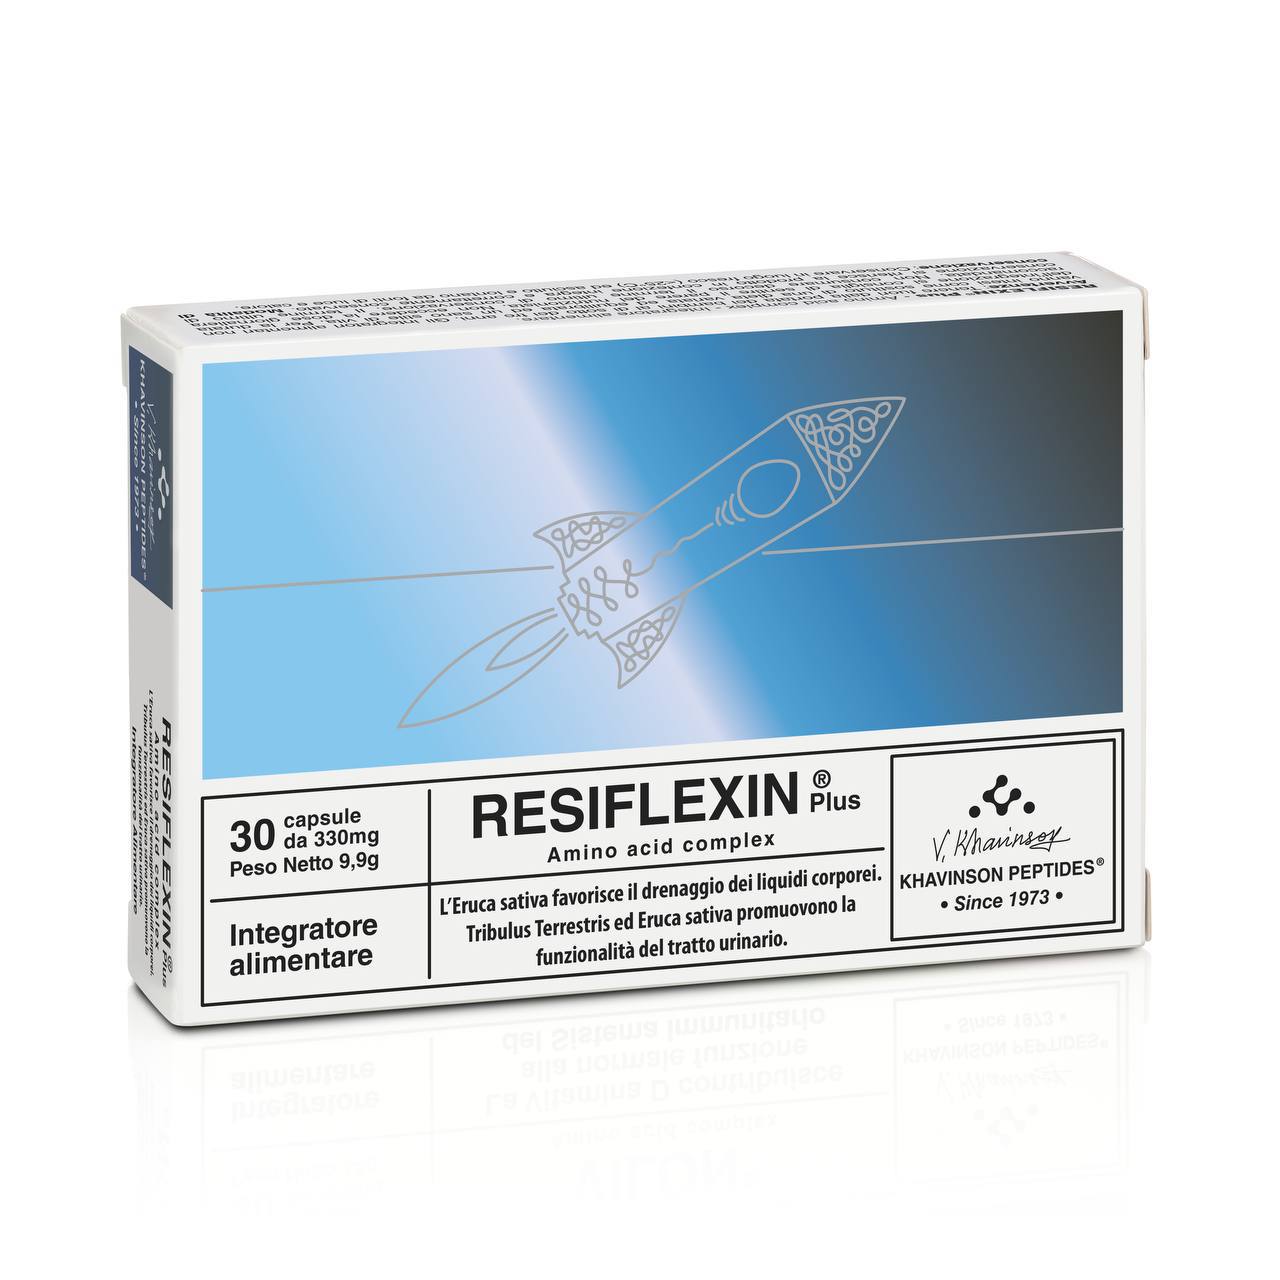 Boosting Male Reproductive Health: RESIFLEXIN®Plus and the Normalization of the Functional State of the Male Reproductive System